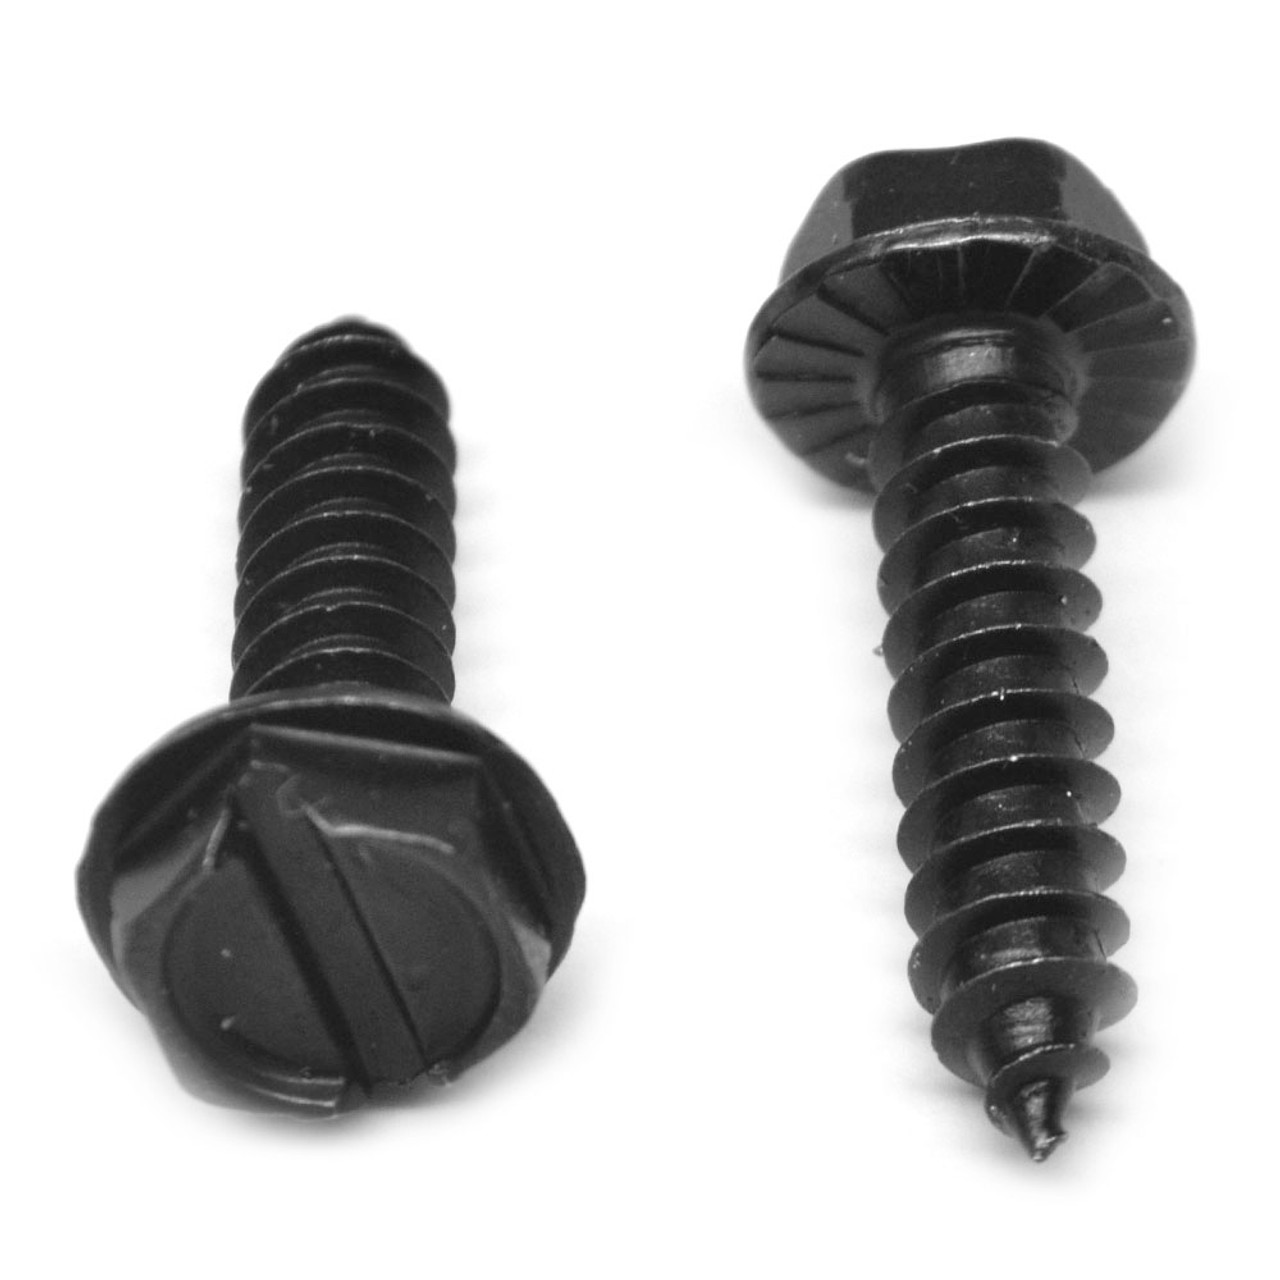 #8-18 x 5/8" (FT) Sheet Metal Screw Slotted Hex Washer Head with Serration Type AB Low Carbon Steel Black Oxide